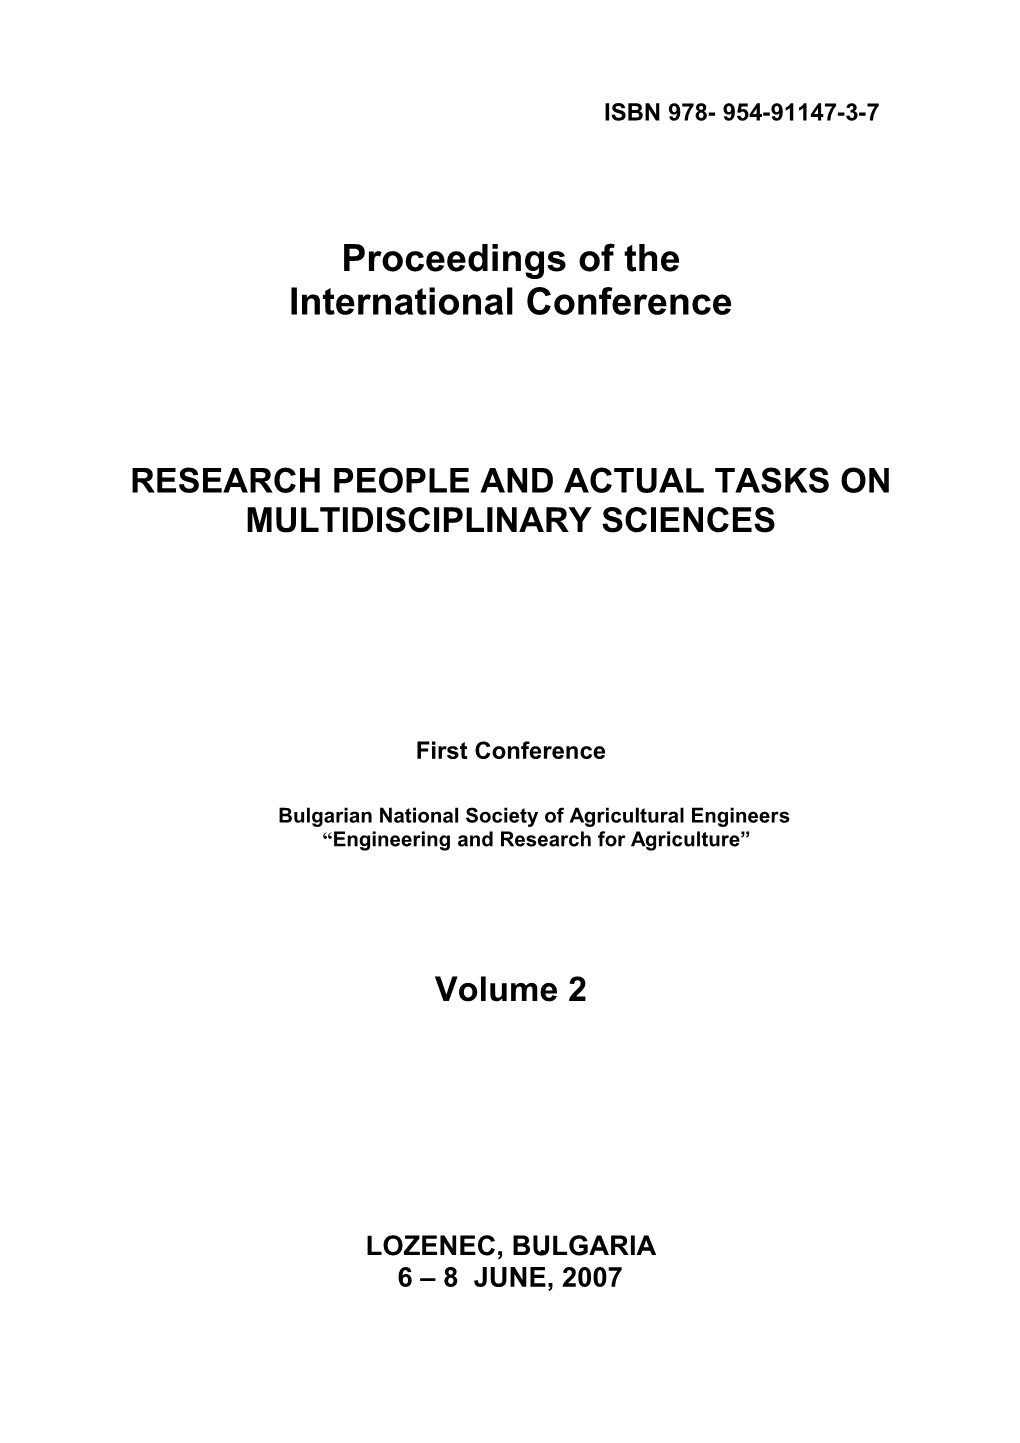 Research People and Actual Tasks on Multidisciplinary Sciences